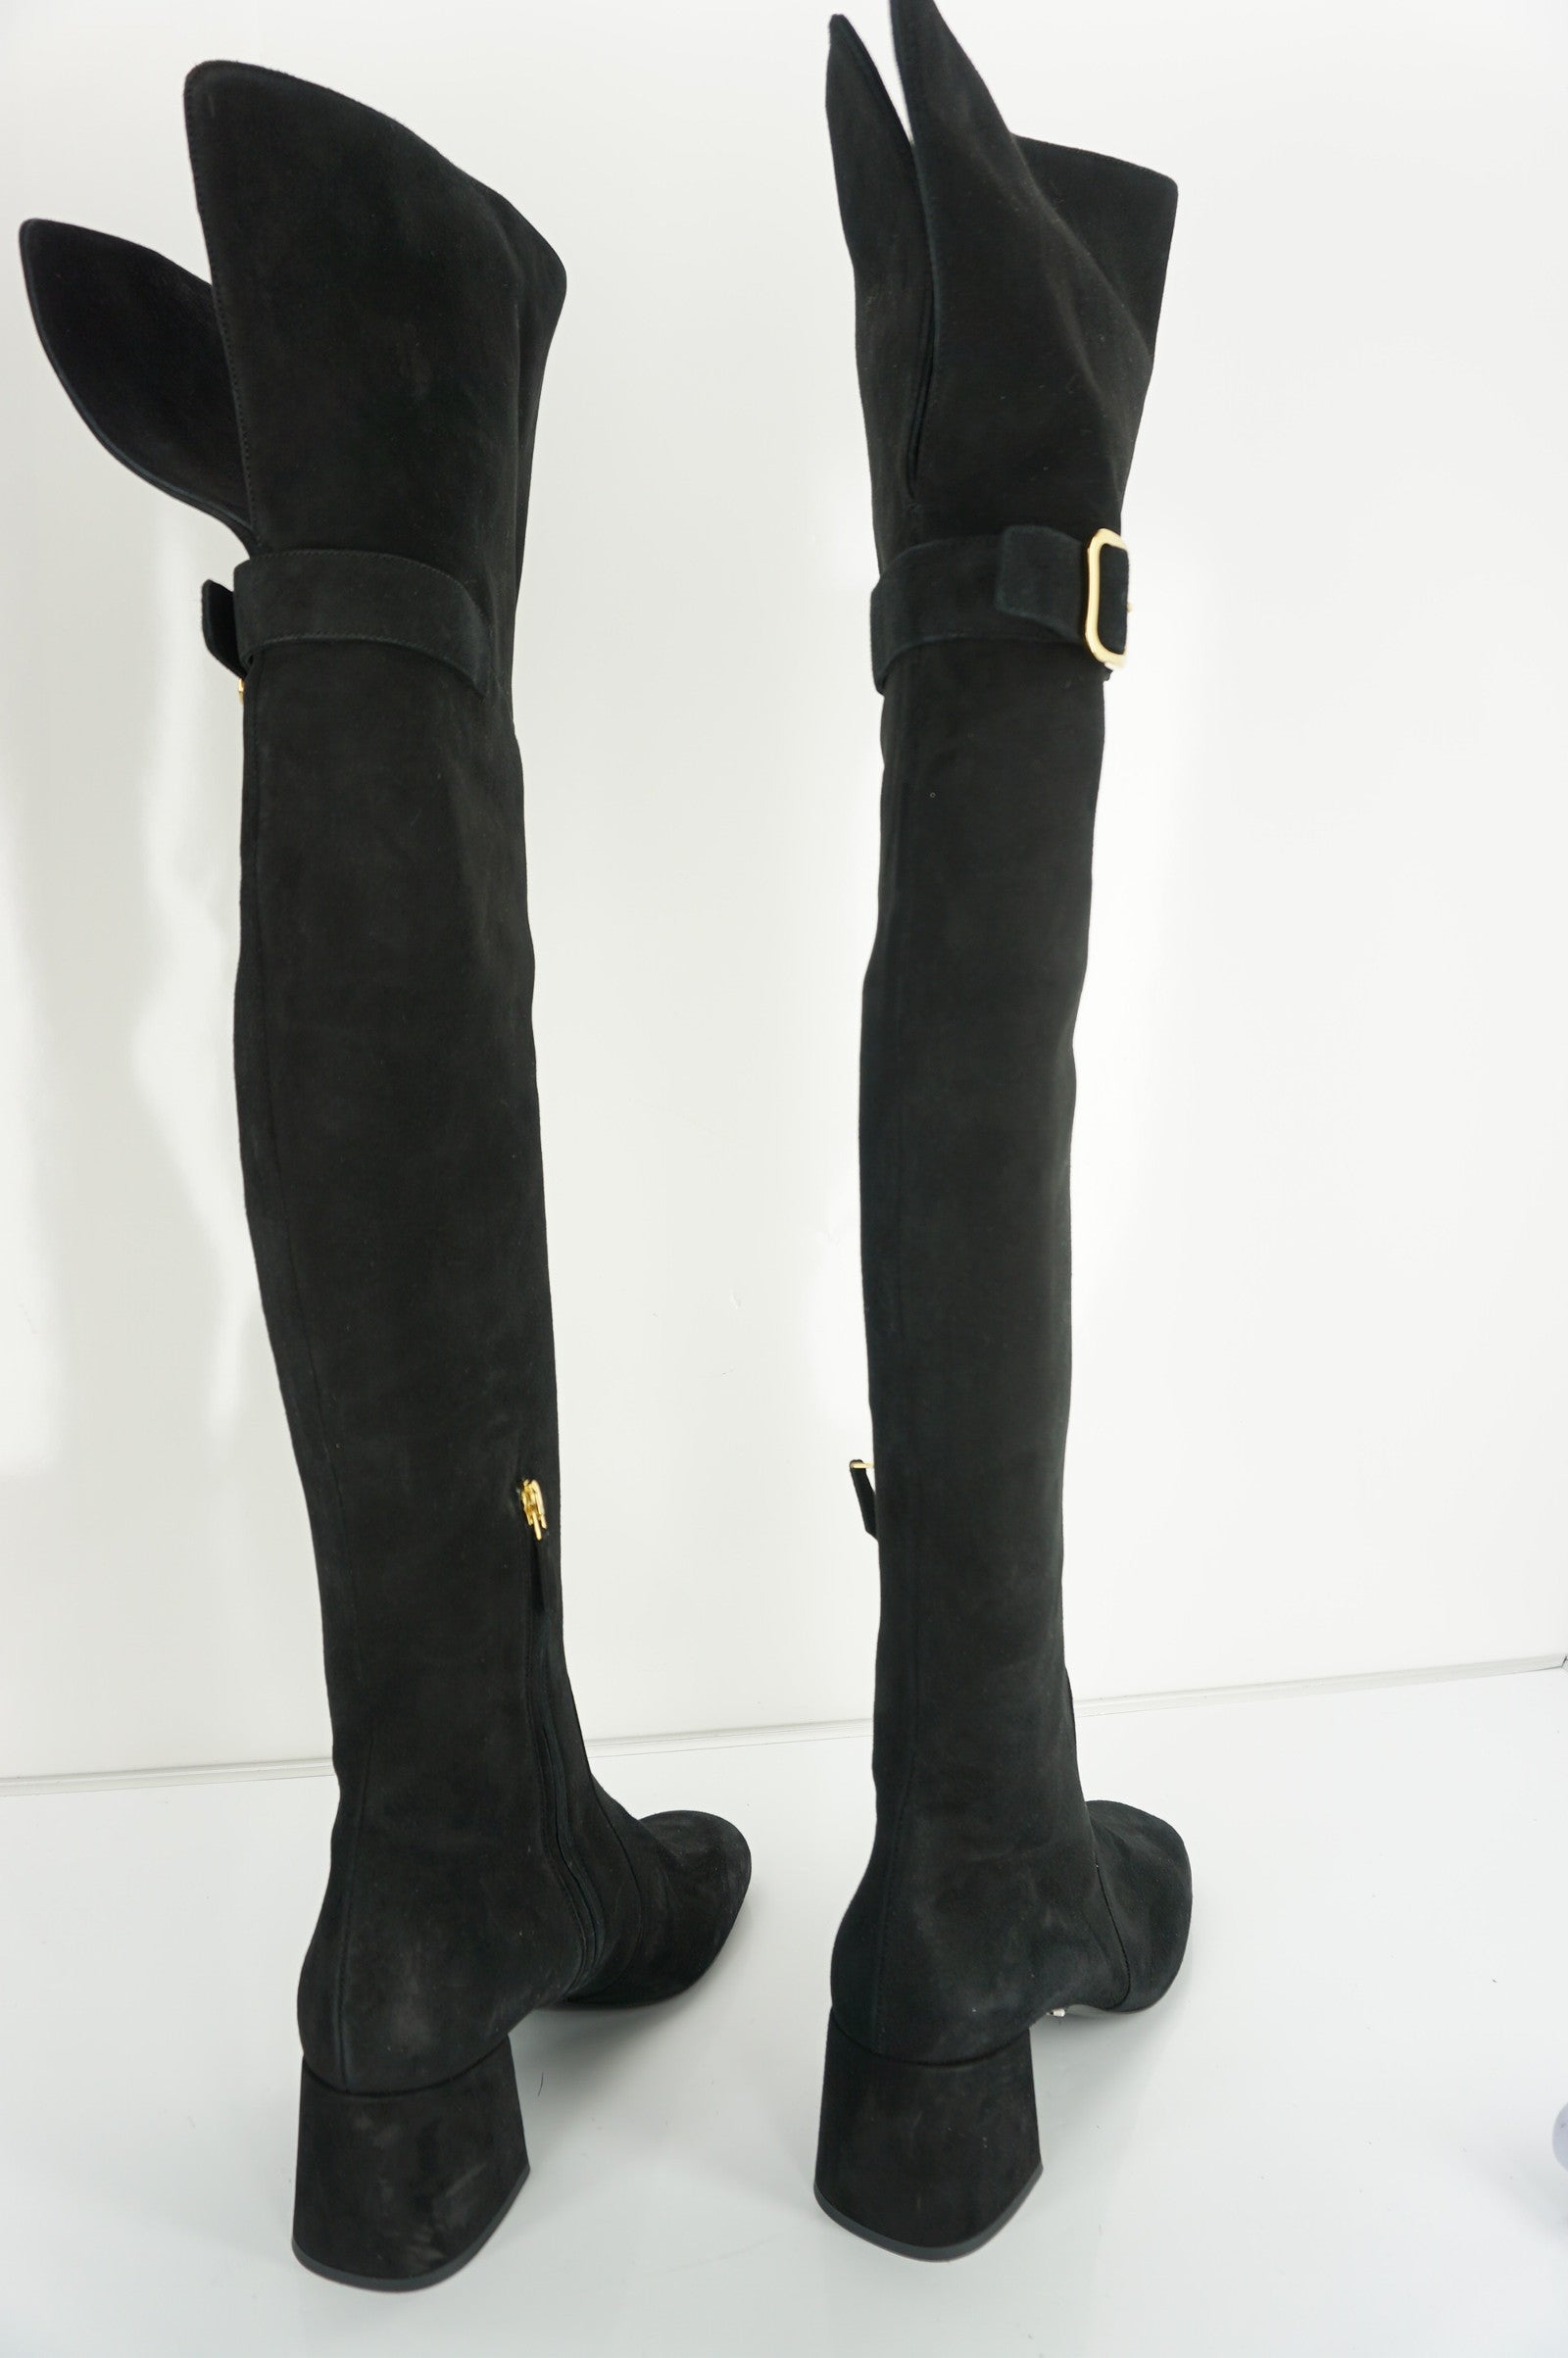 Prada Black Suede Leather Over The Knee Block Heel Boots Size 37 New Tall $1895